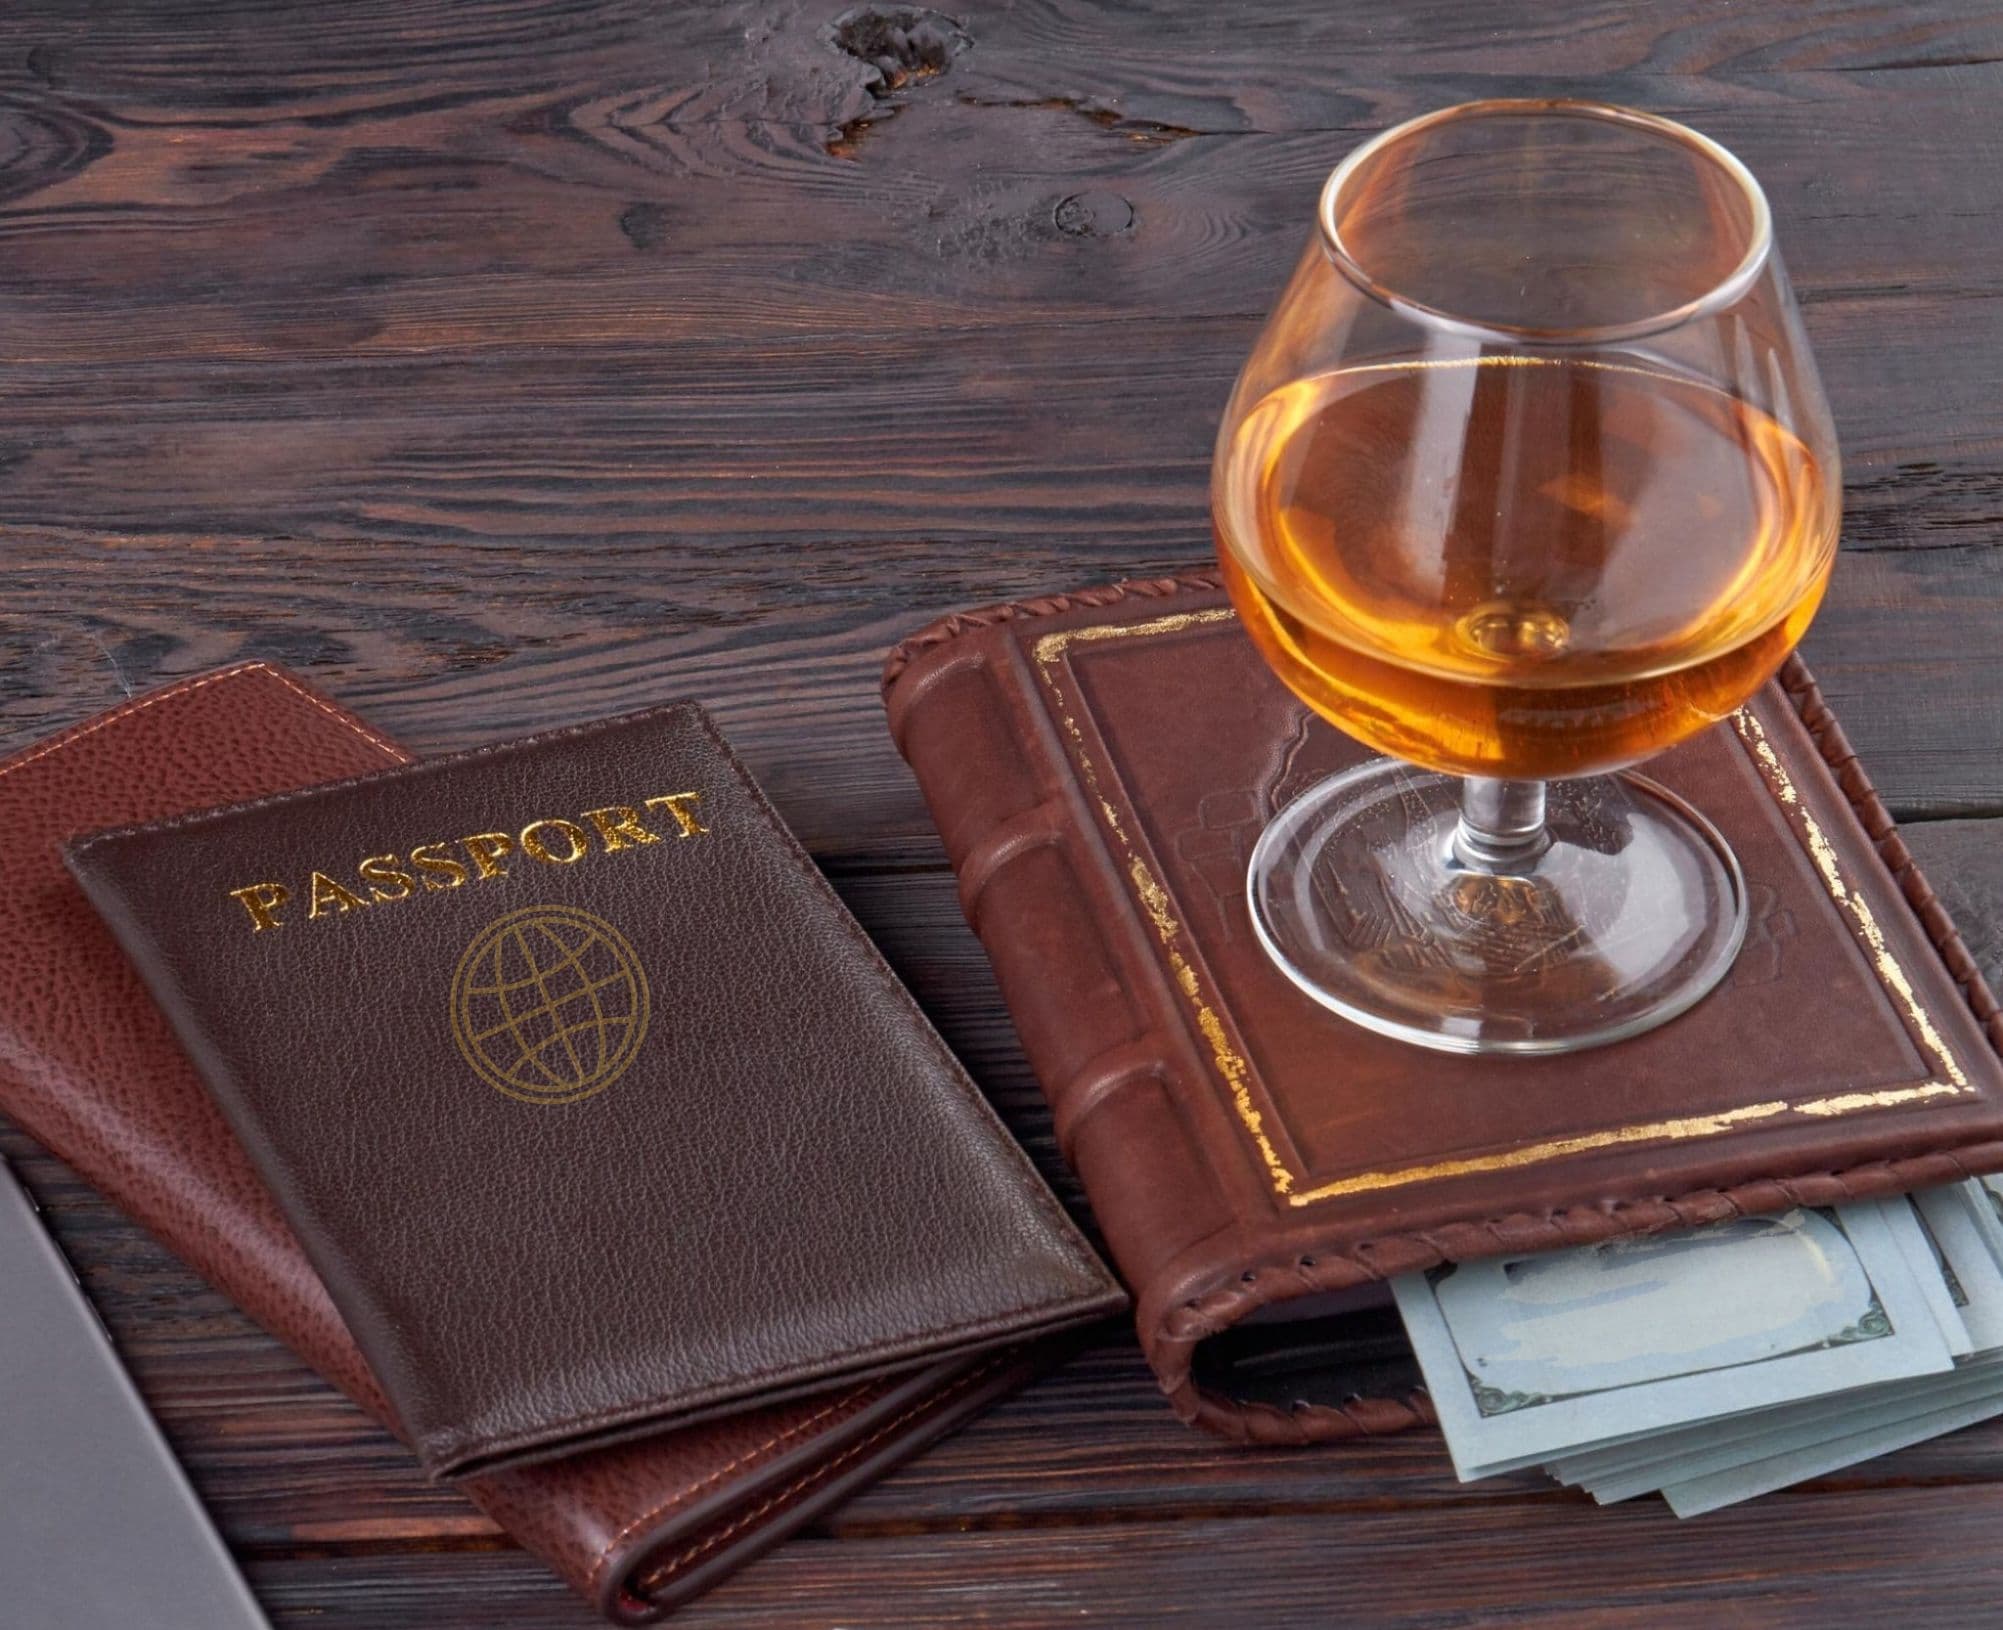 A whisky-tasting journey can be your next exclusive hosting idea 